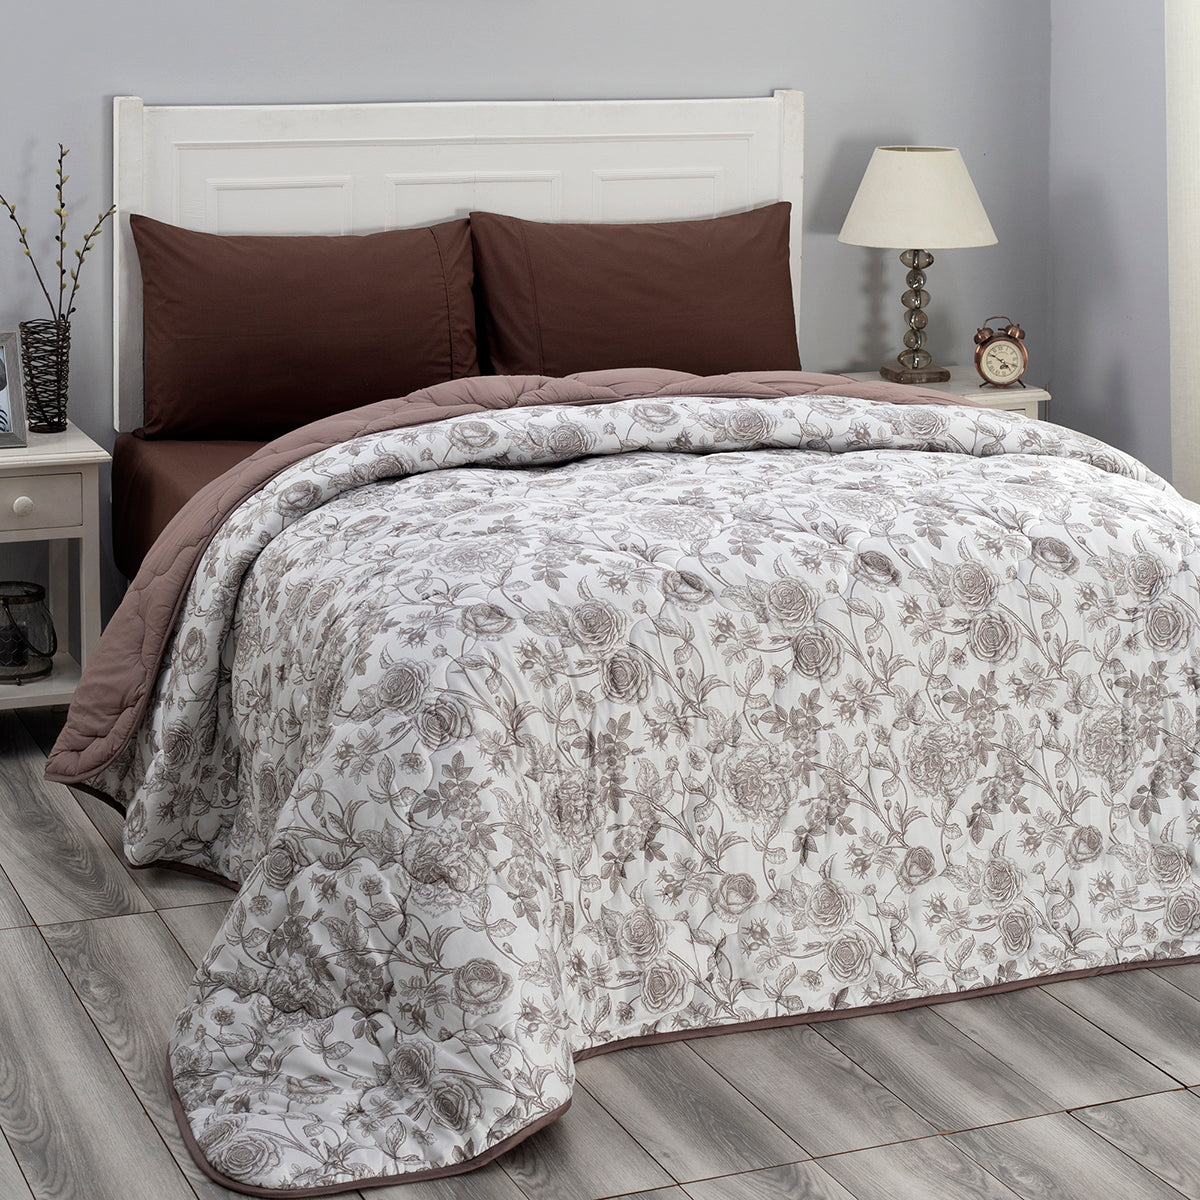 Blossom Couture Emma Winter Quilt/Quilted Bed Cover/Comforter Brown